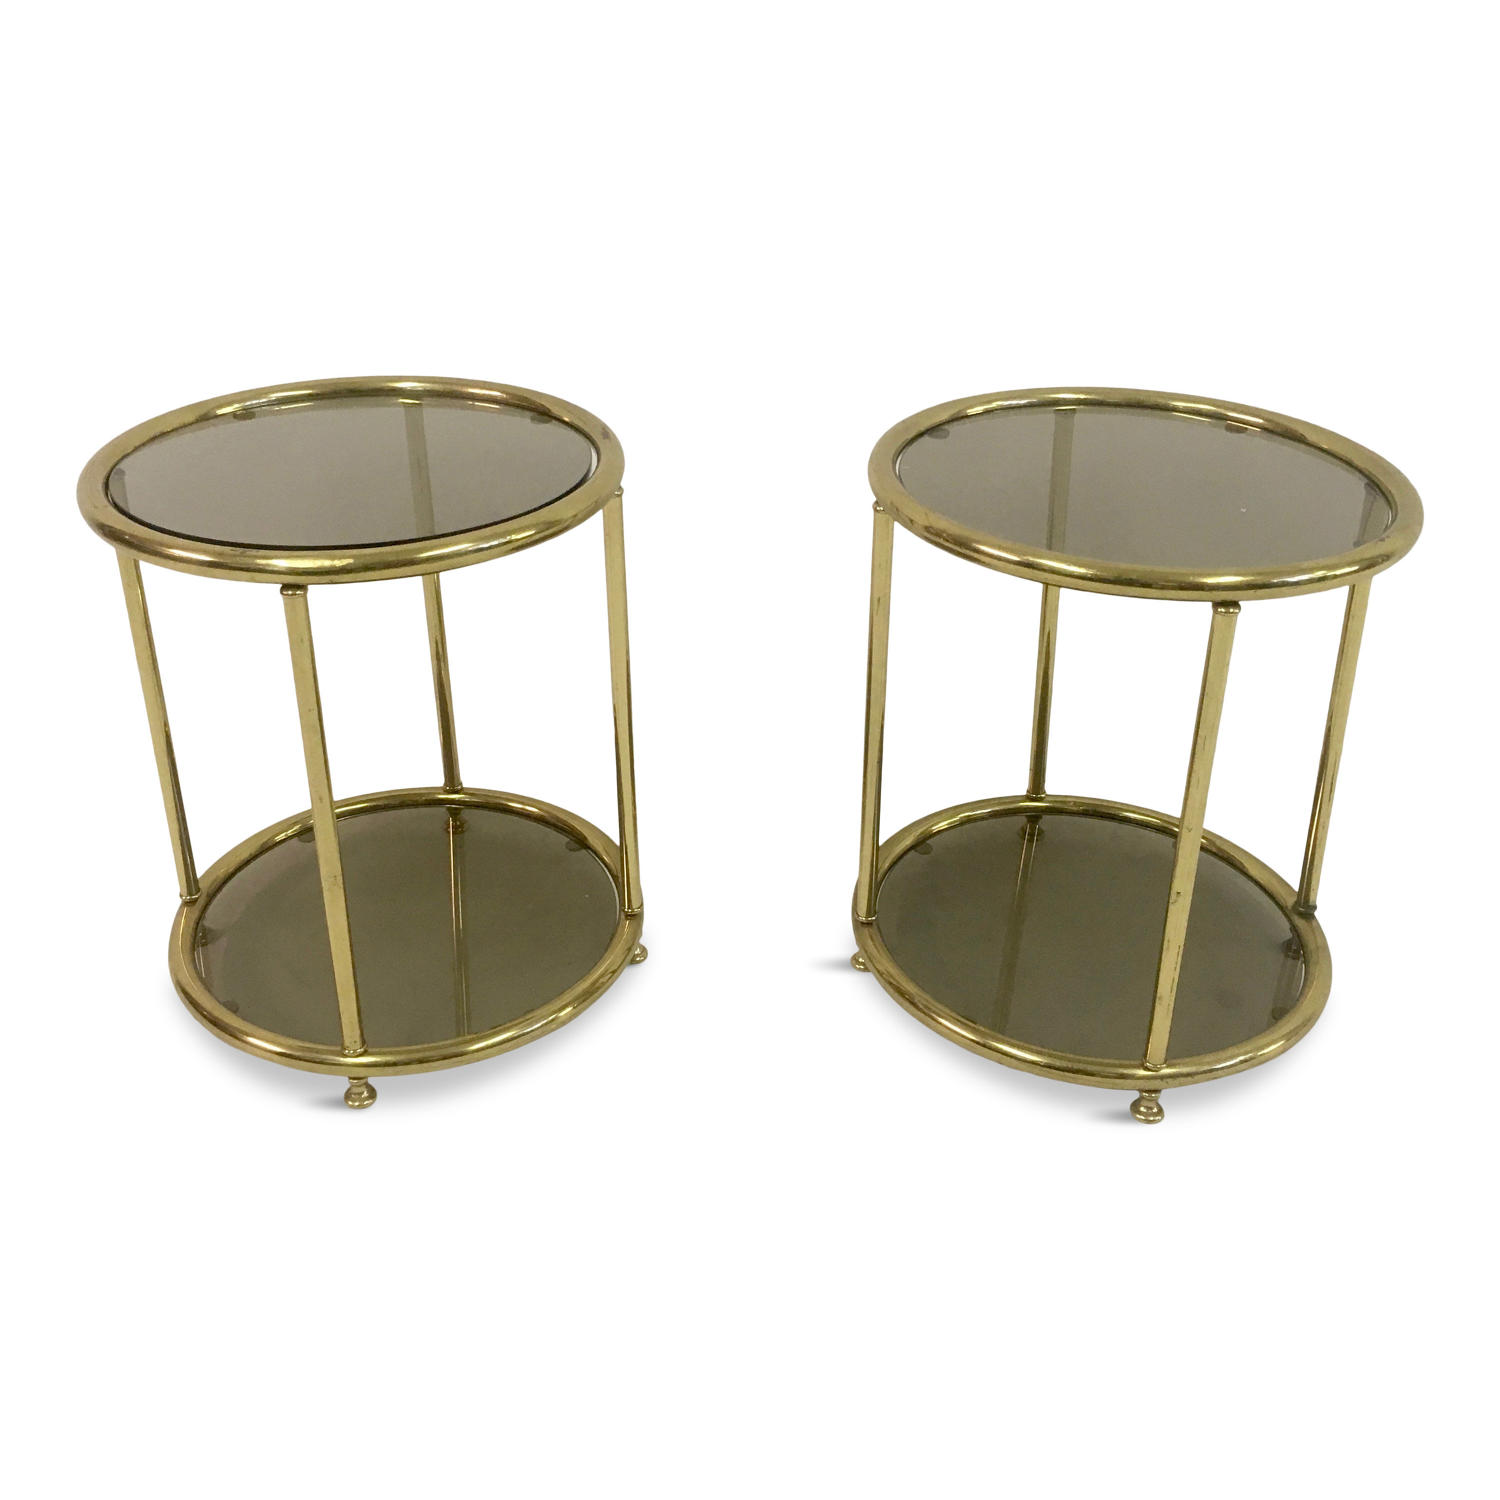 Pair of 1970s Italian brass side tables